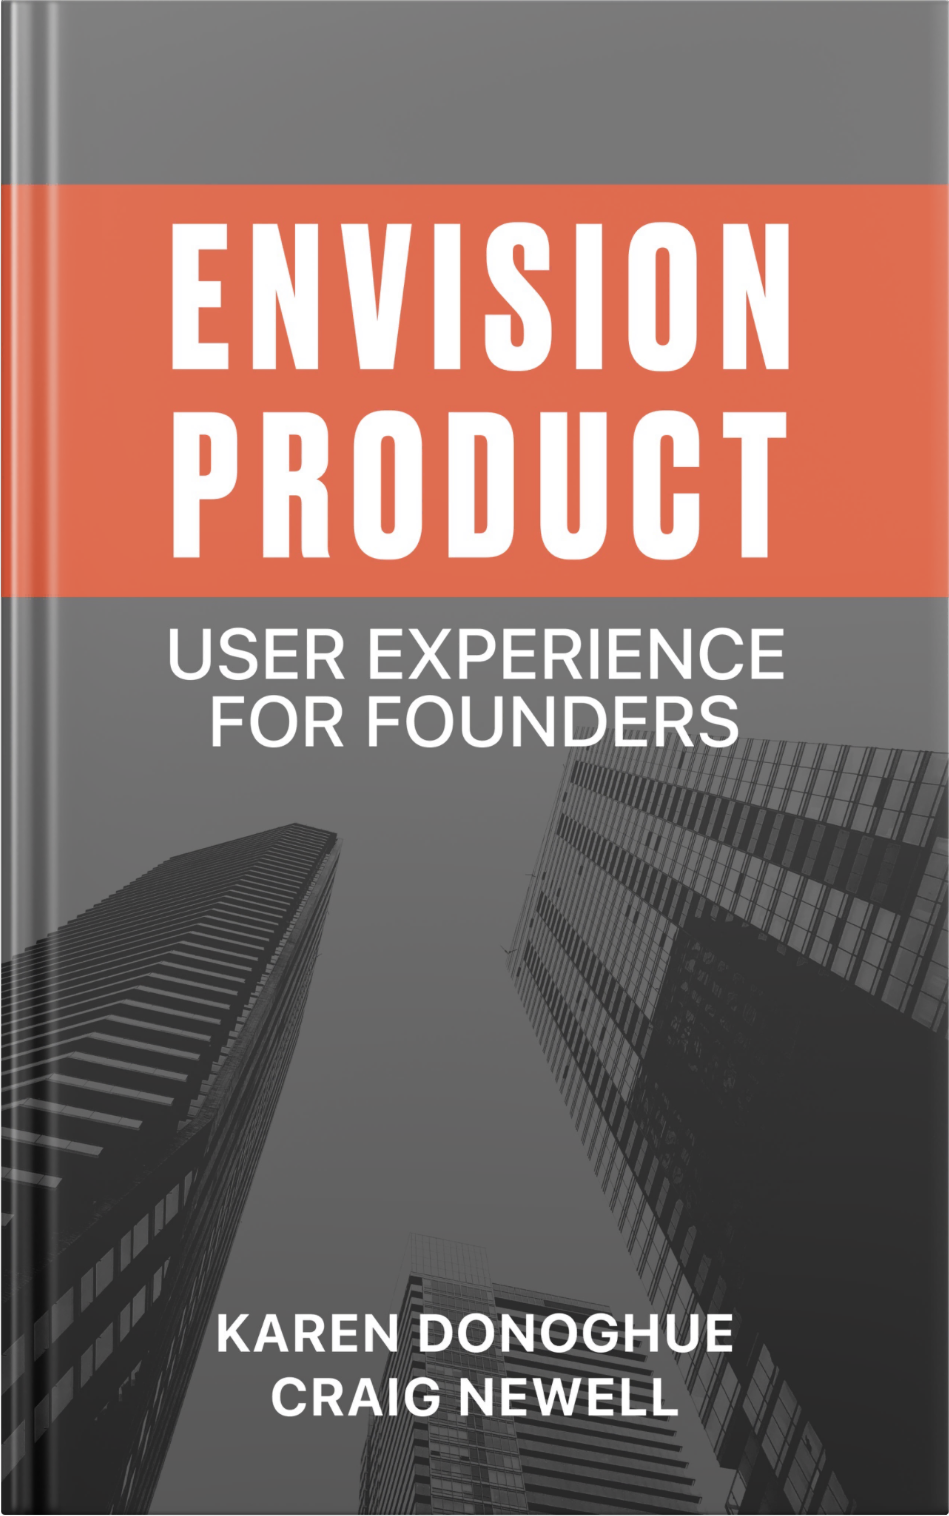 Envision Product: User Experience for Founders (Available on Apple Books and Amazon Kindle)
Envision Product: User Experience for Founders
Envision Product: User Experience for Founders
by Karen Donoghue and Craig Newell, Principals, HumanLogic